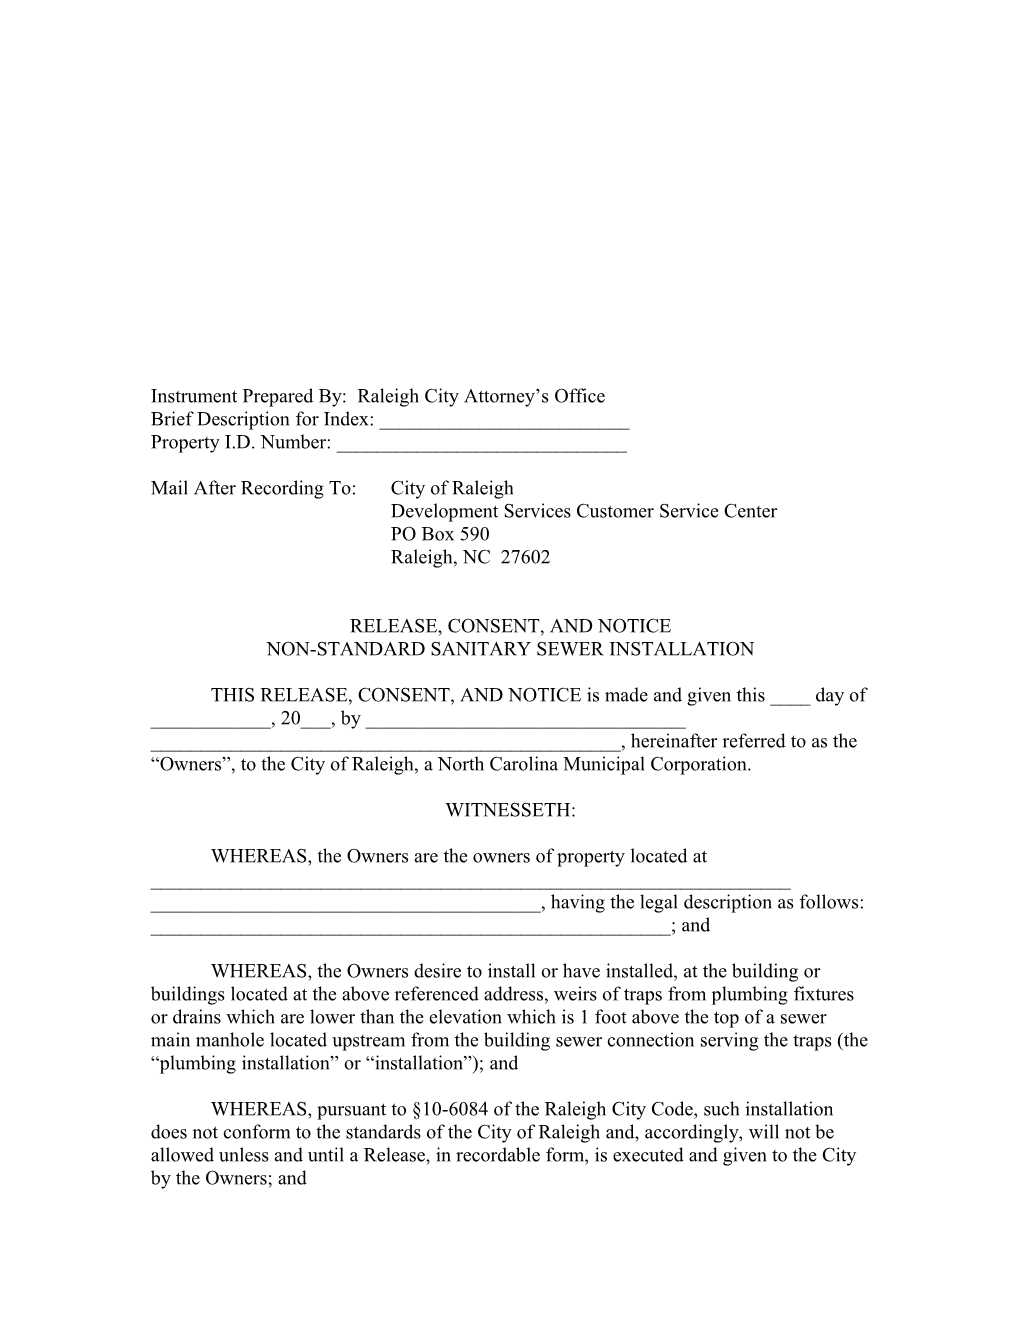 LLP Sewer Release Form